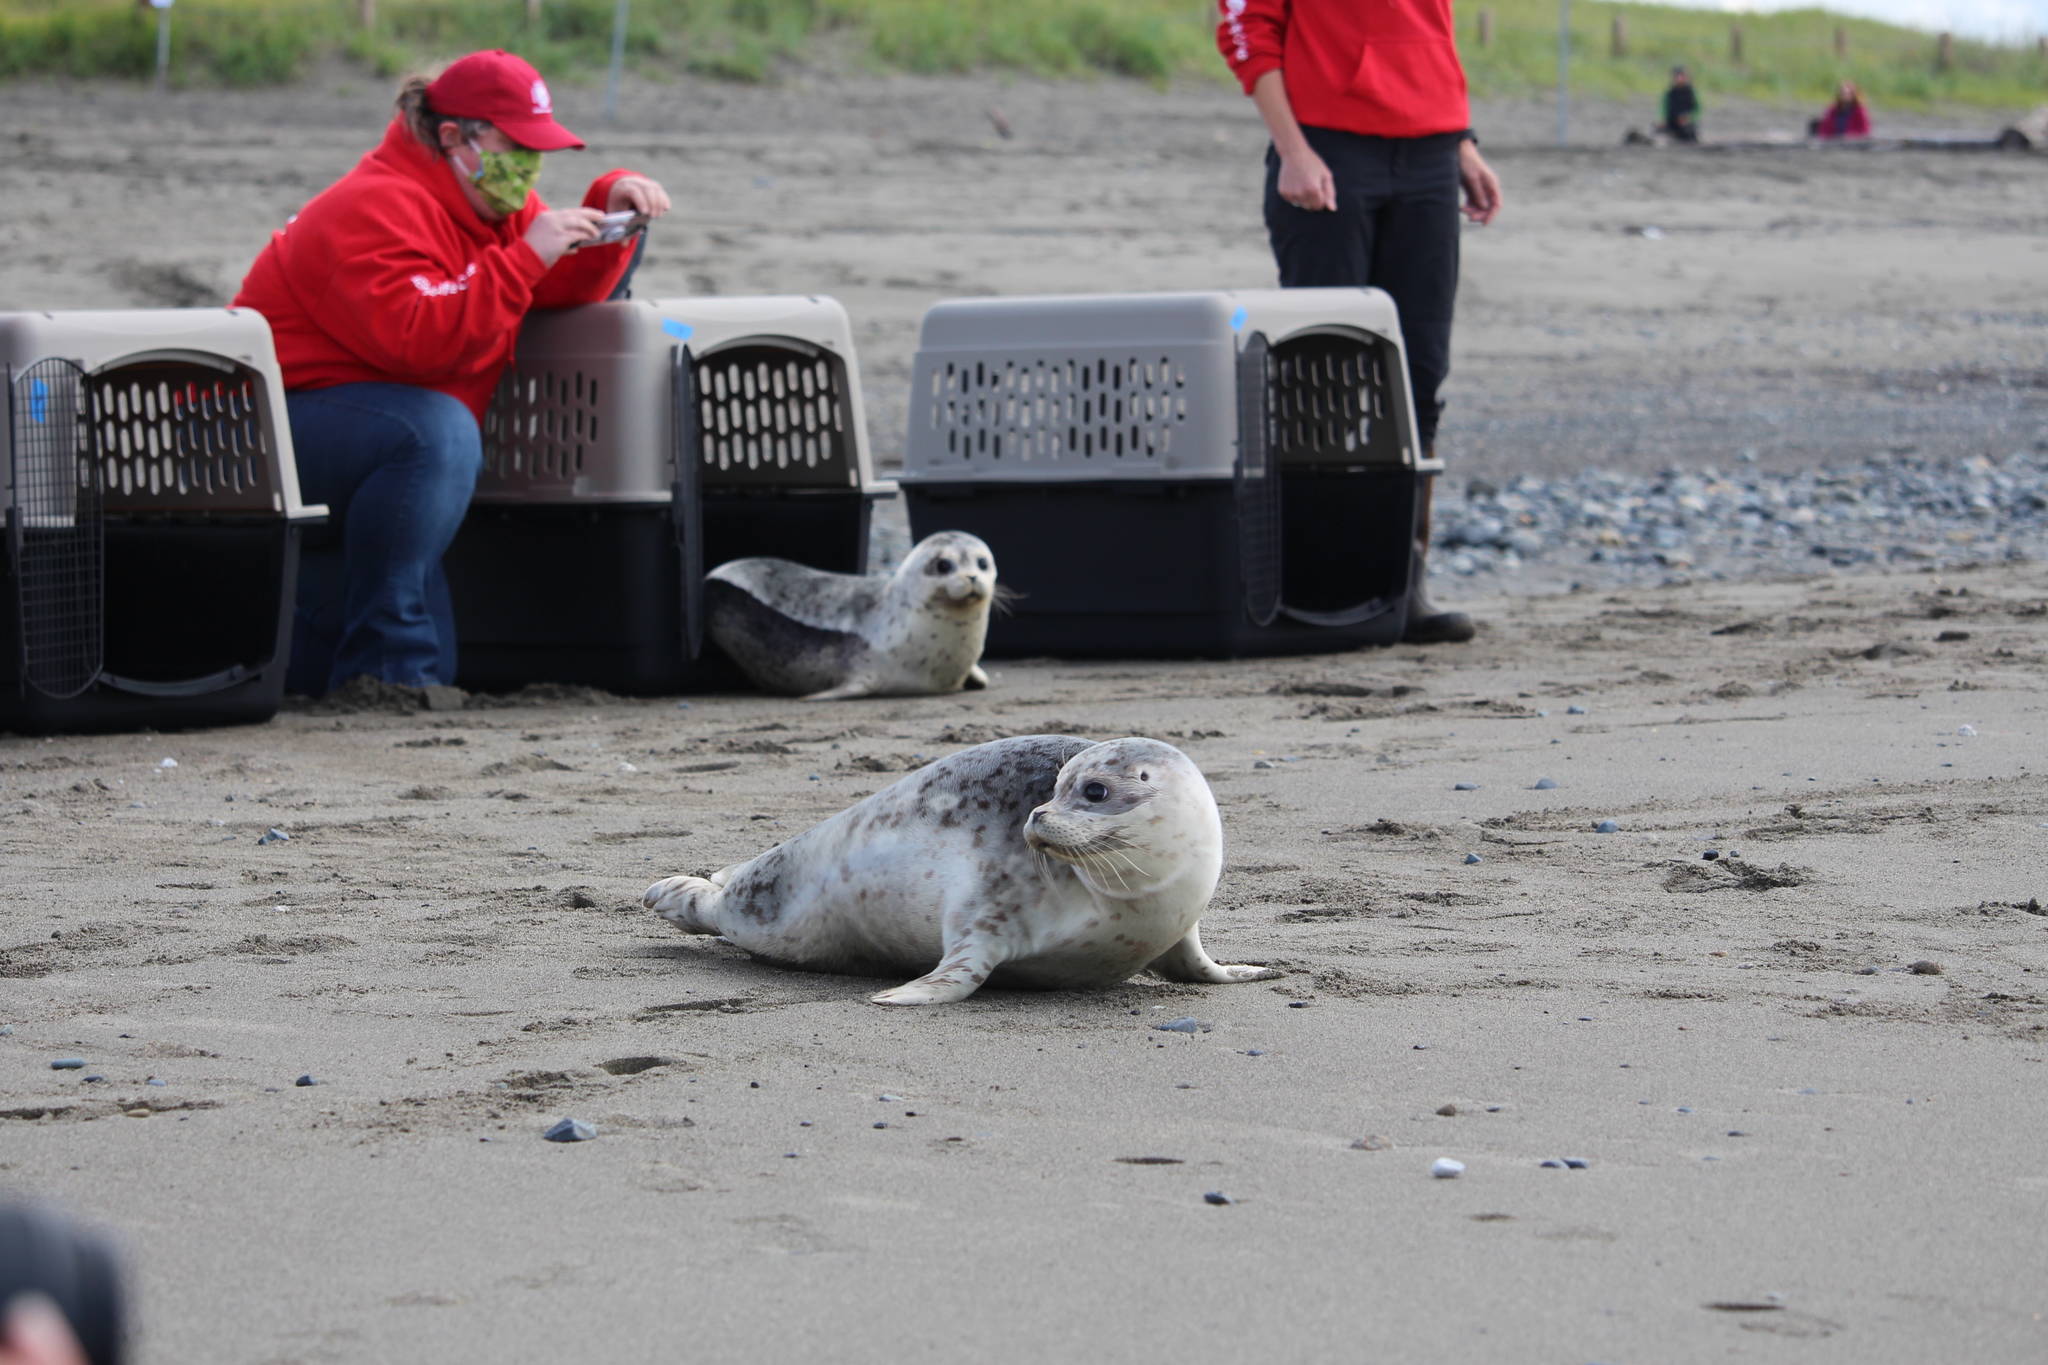 Harbor seals make their way into Cook Inlet after being released by staff from the Alaska SeaLife Center at the Kenai Beach on Aug. 27, 2020. (Photo by Brian Mazurek/Peninsula Clarion)